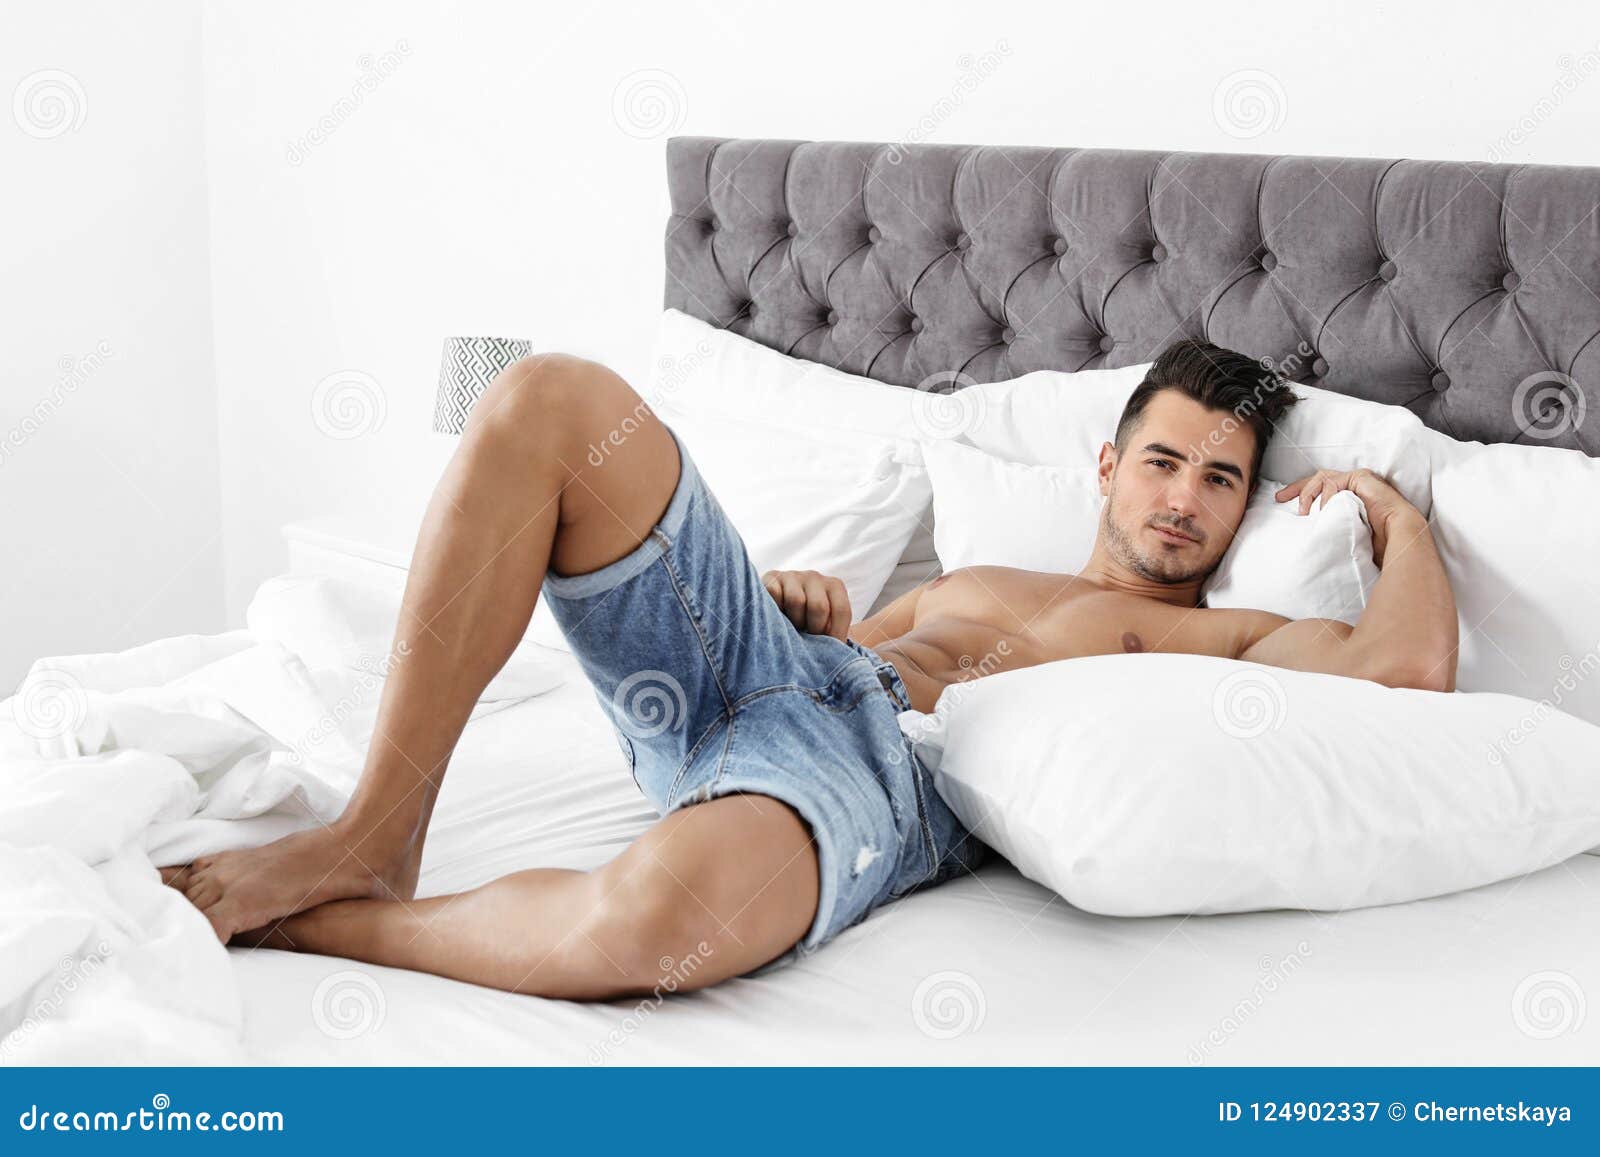 Young Man Lying On Bed With Soft Pillows Stock Image - Image of male, athle...